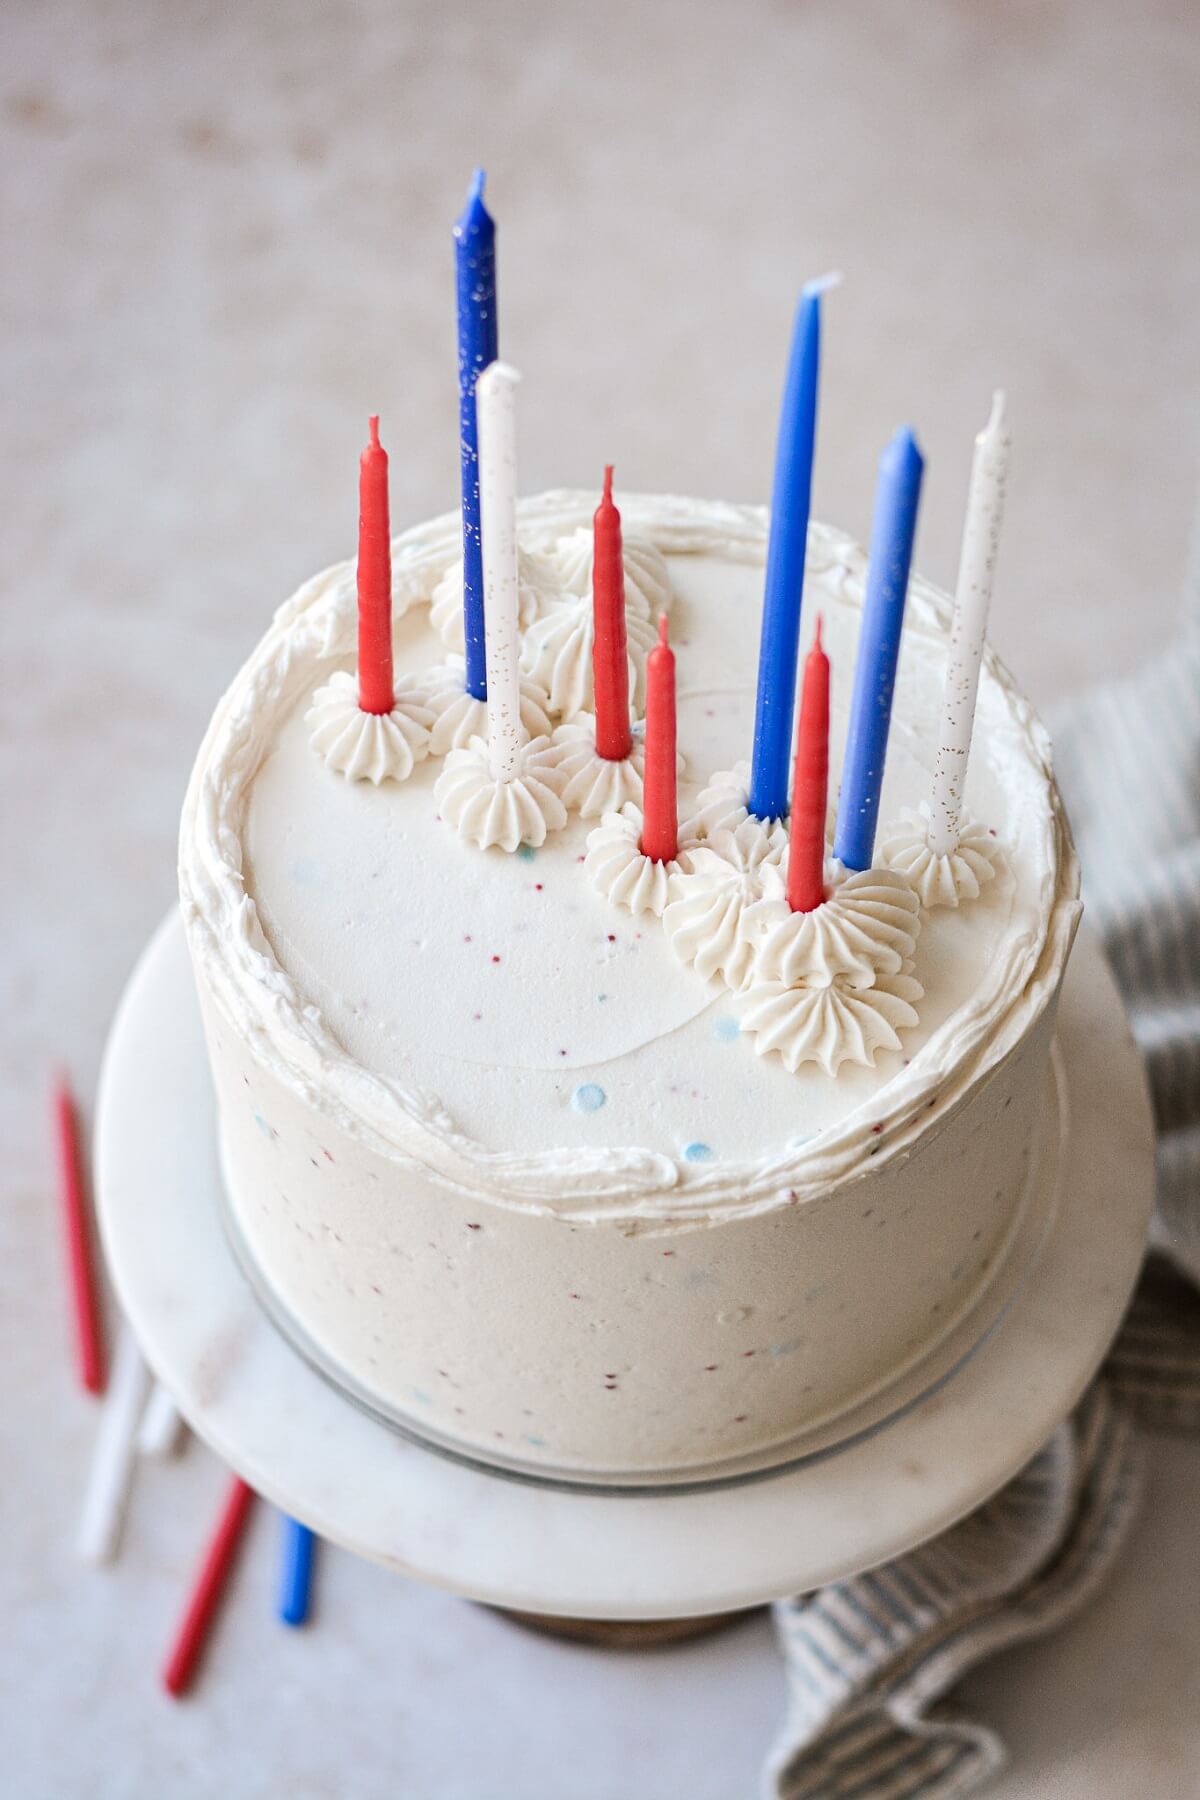 Red, white and blue candles on a cake.